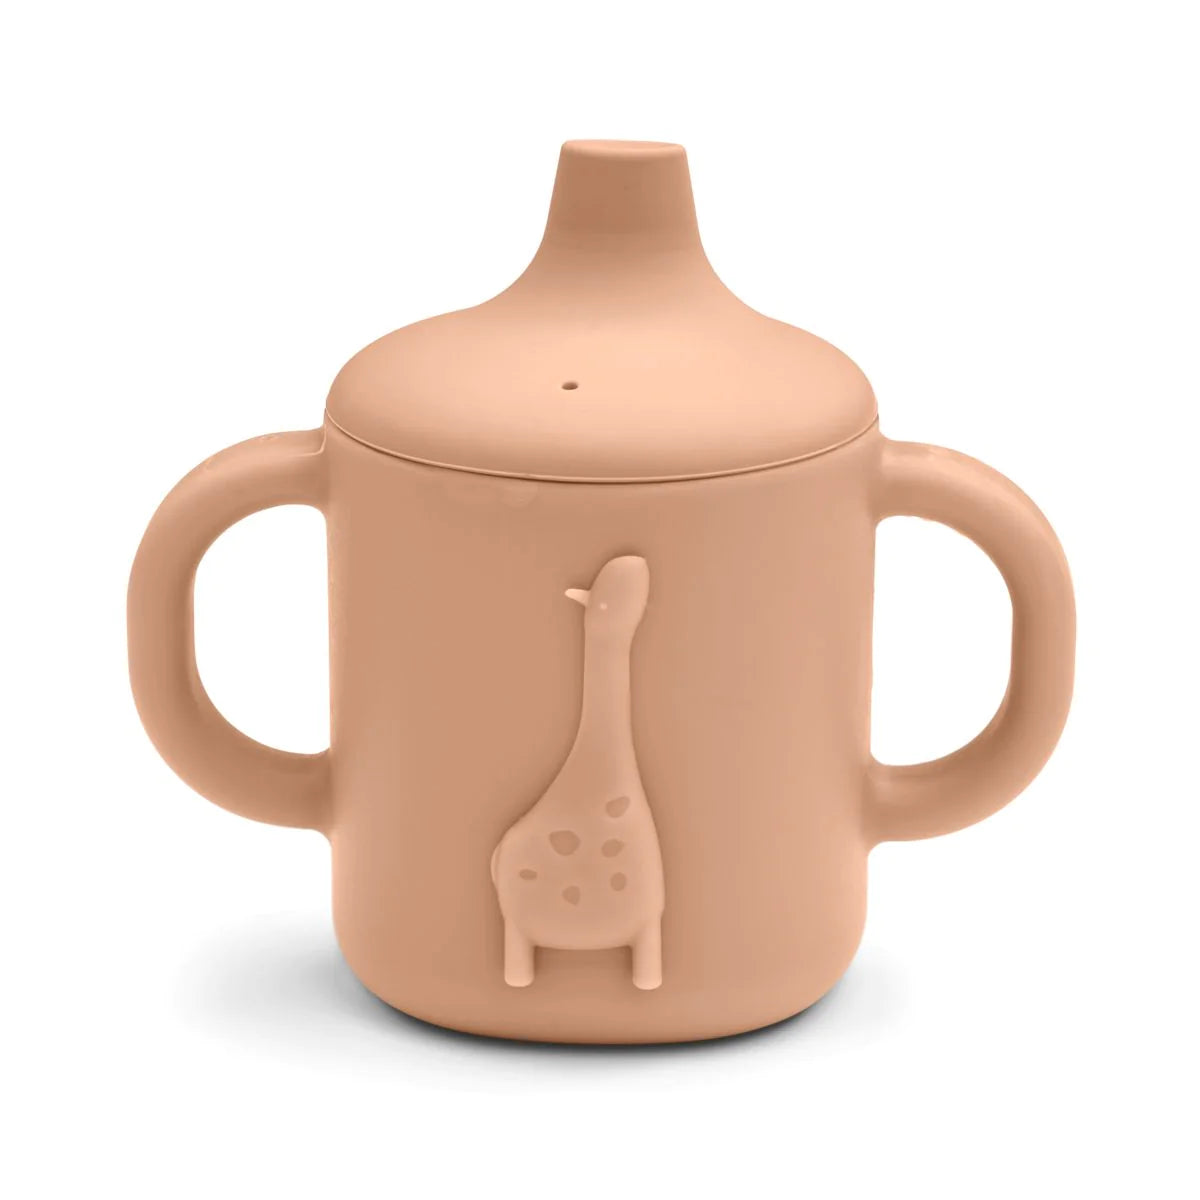 Amelio Sippy Cup - Tuscany rose